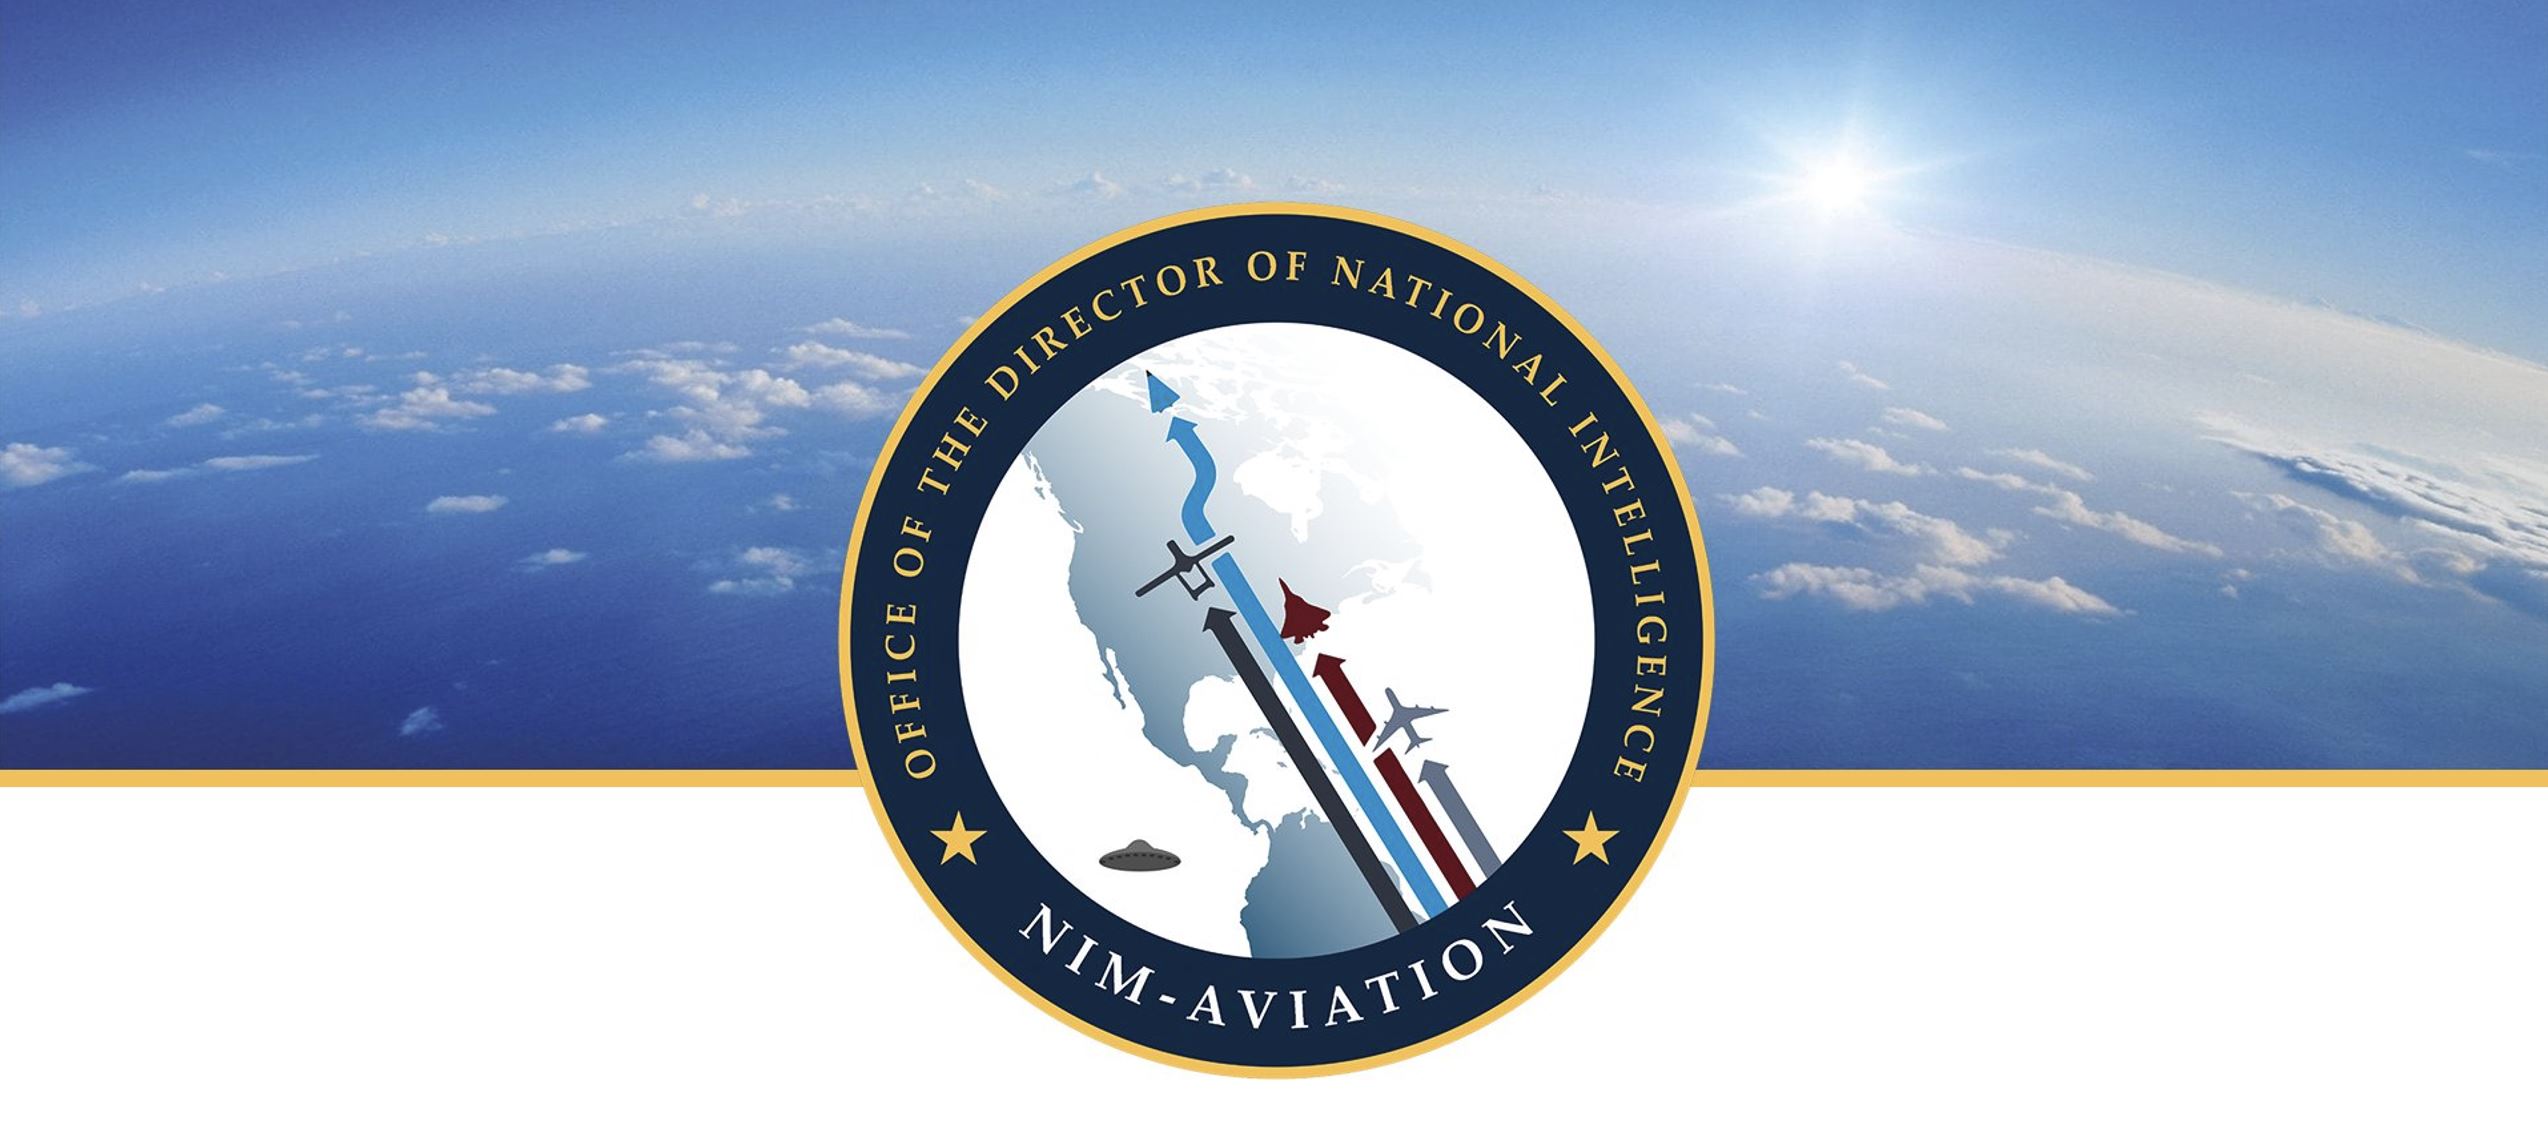 The logo of NIM-Aviation features a UFO. Image Credit: NIM-Aviation / Nick Pope.